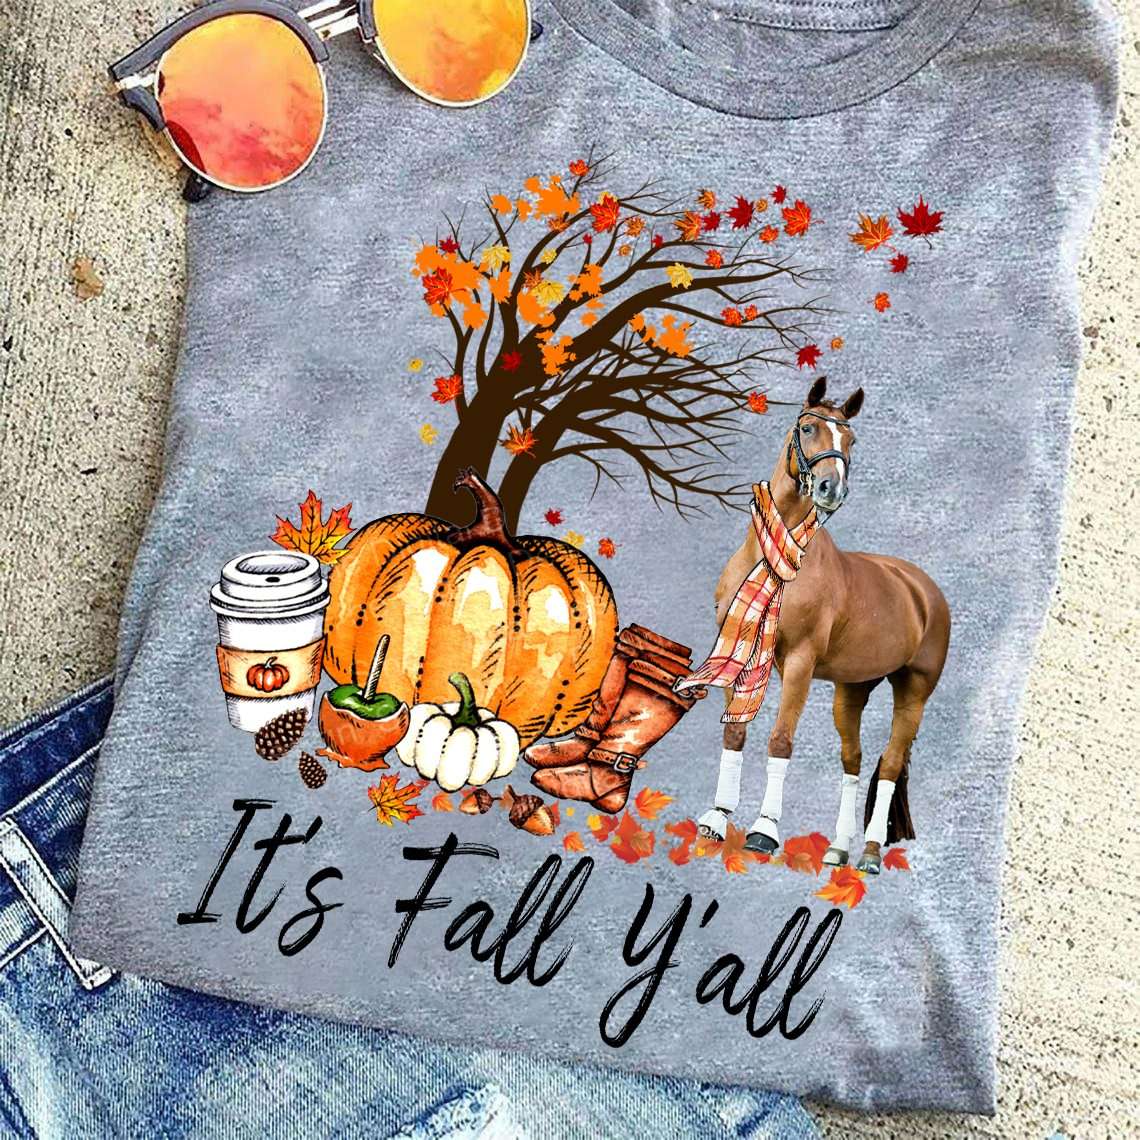 Autumn Horse, Horse And Pumpkin - It's fall y'all